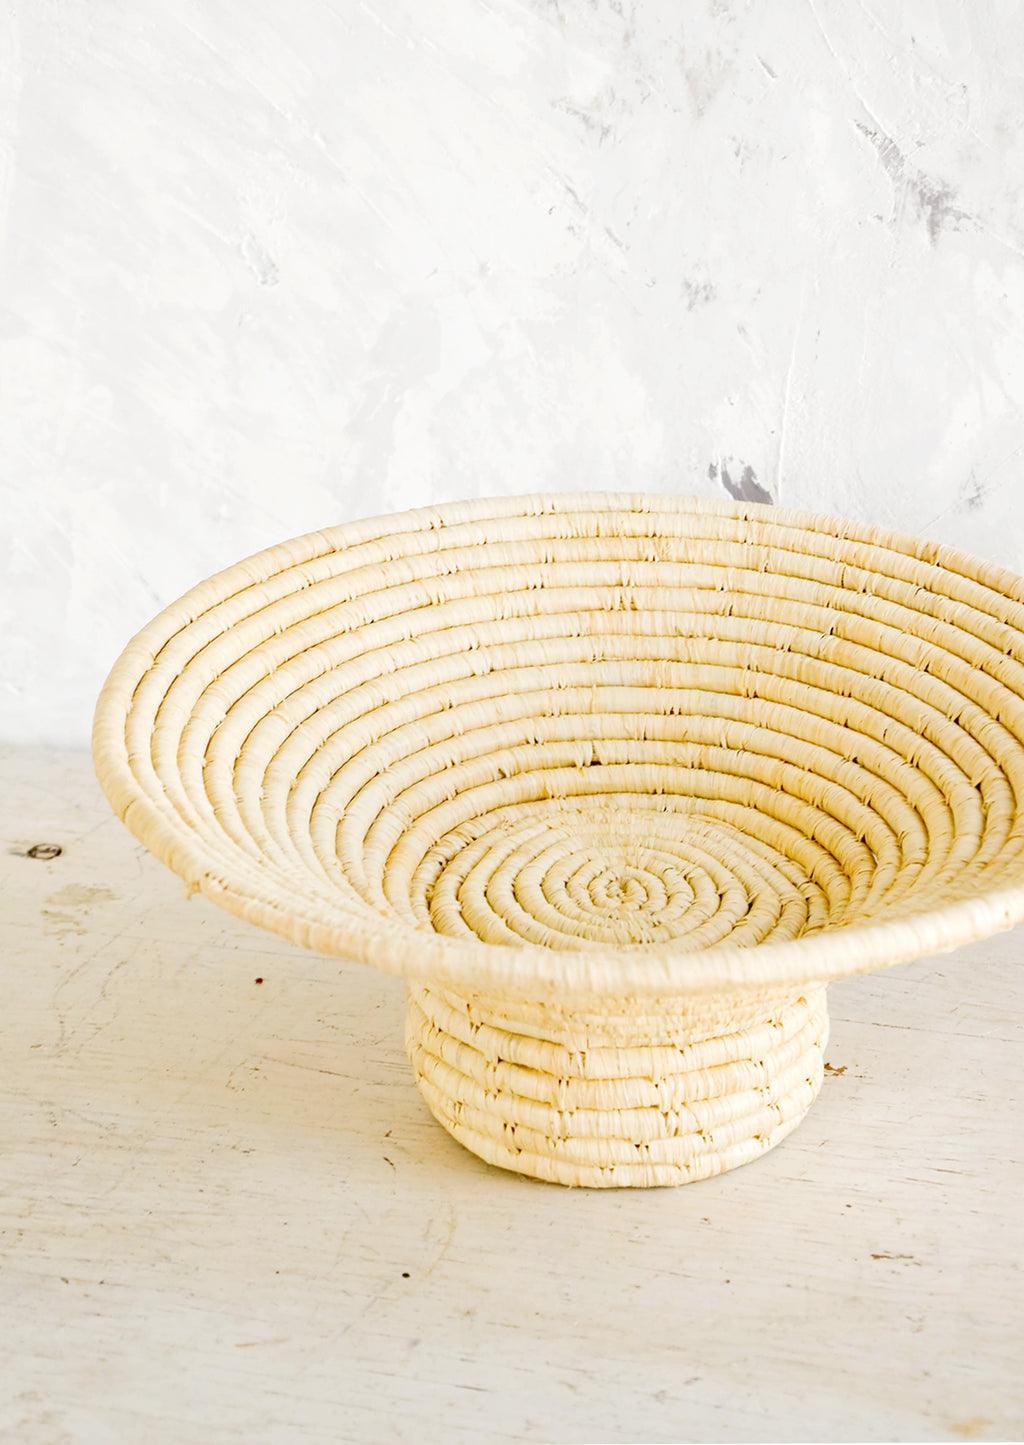 1: Footed pedestal bowl made from natural woven raffia, sitting on a table